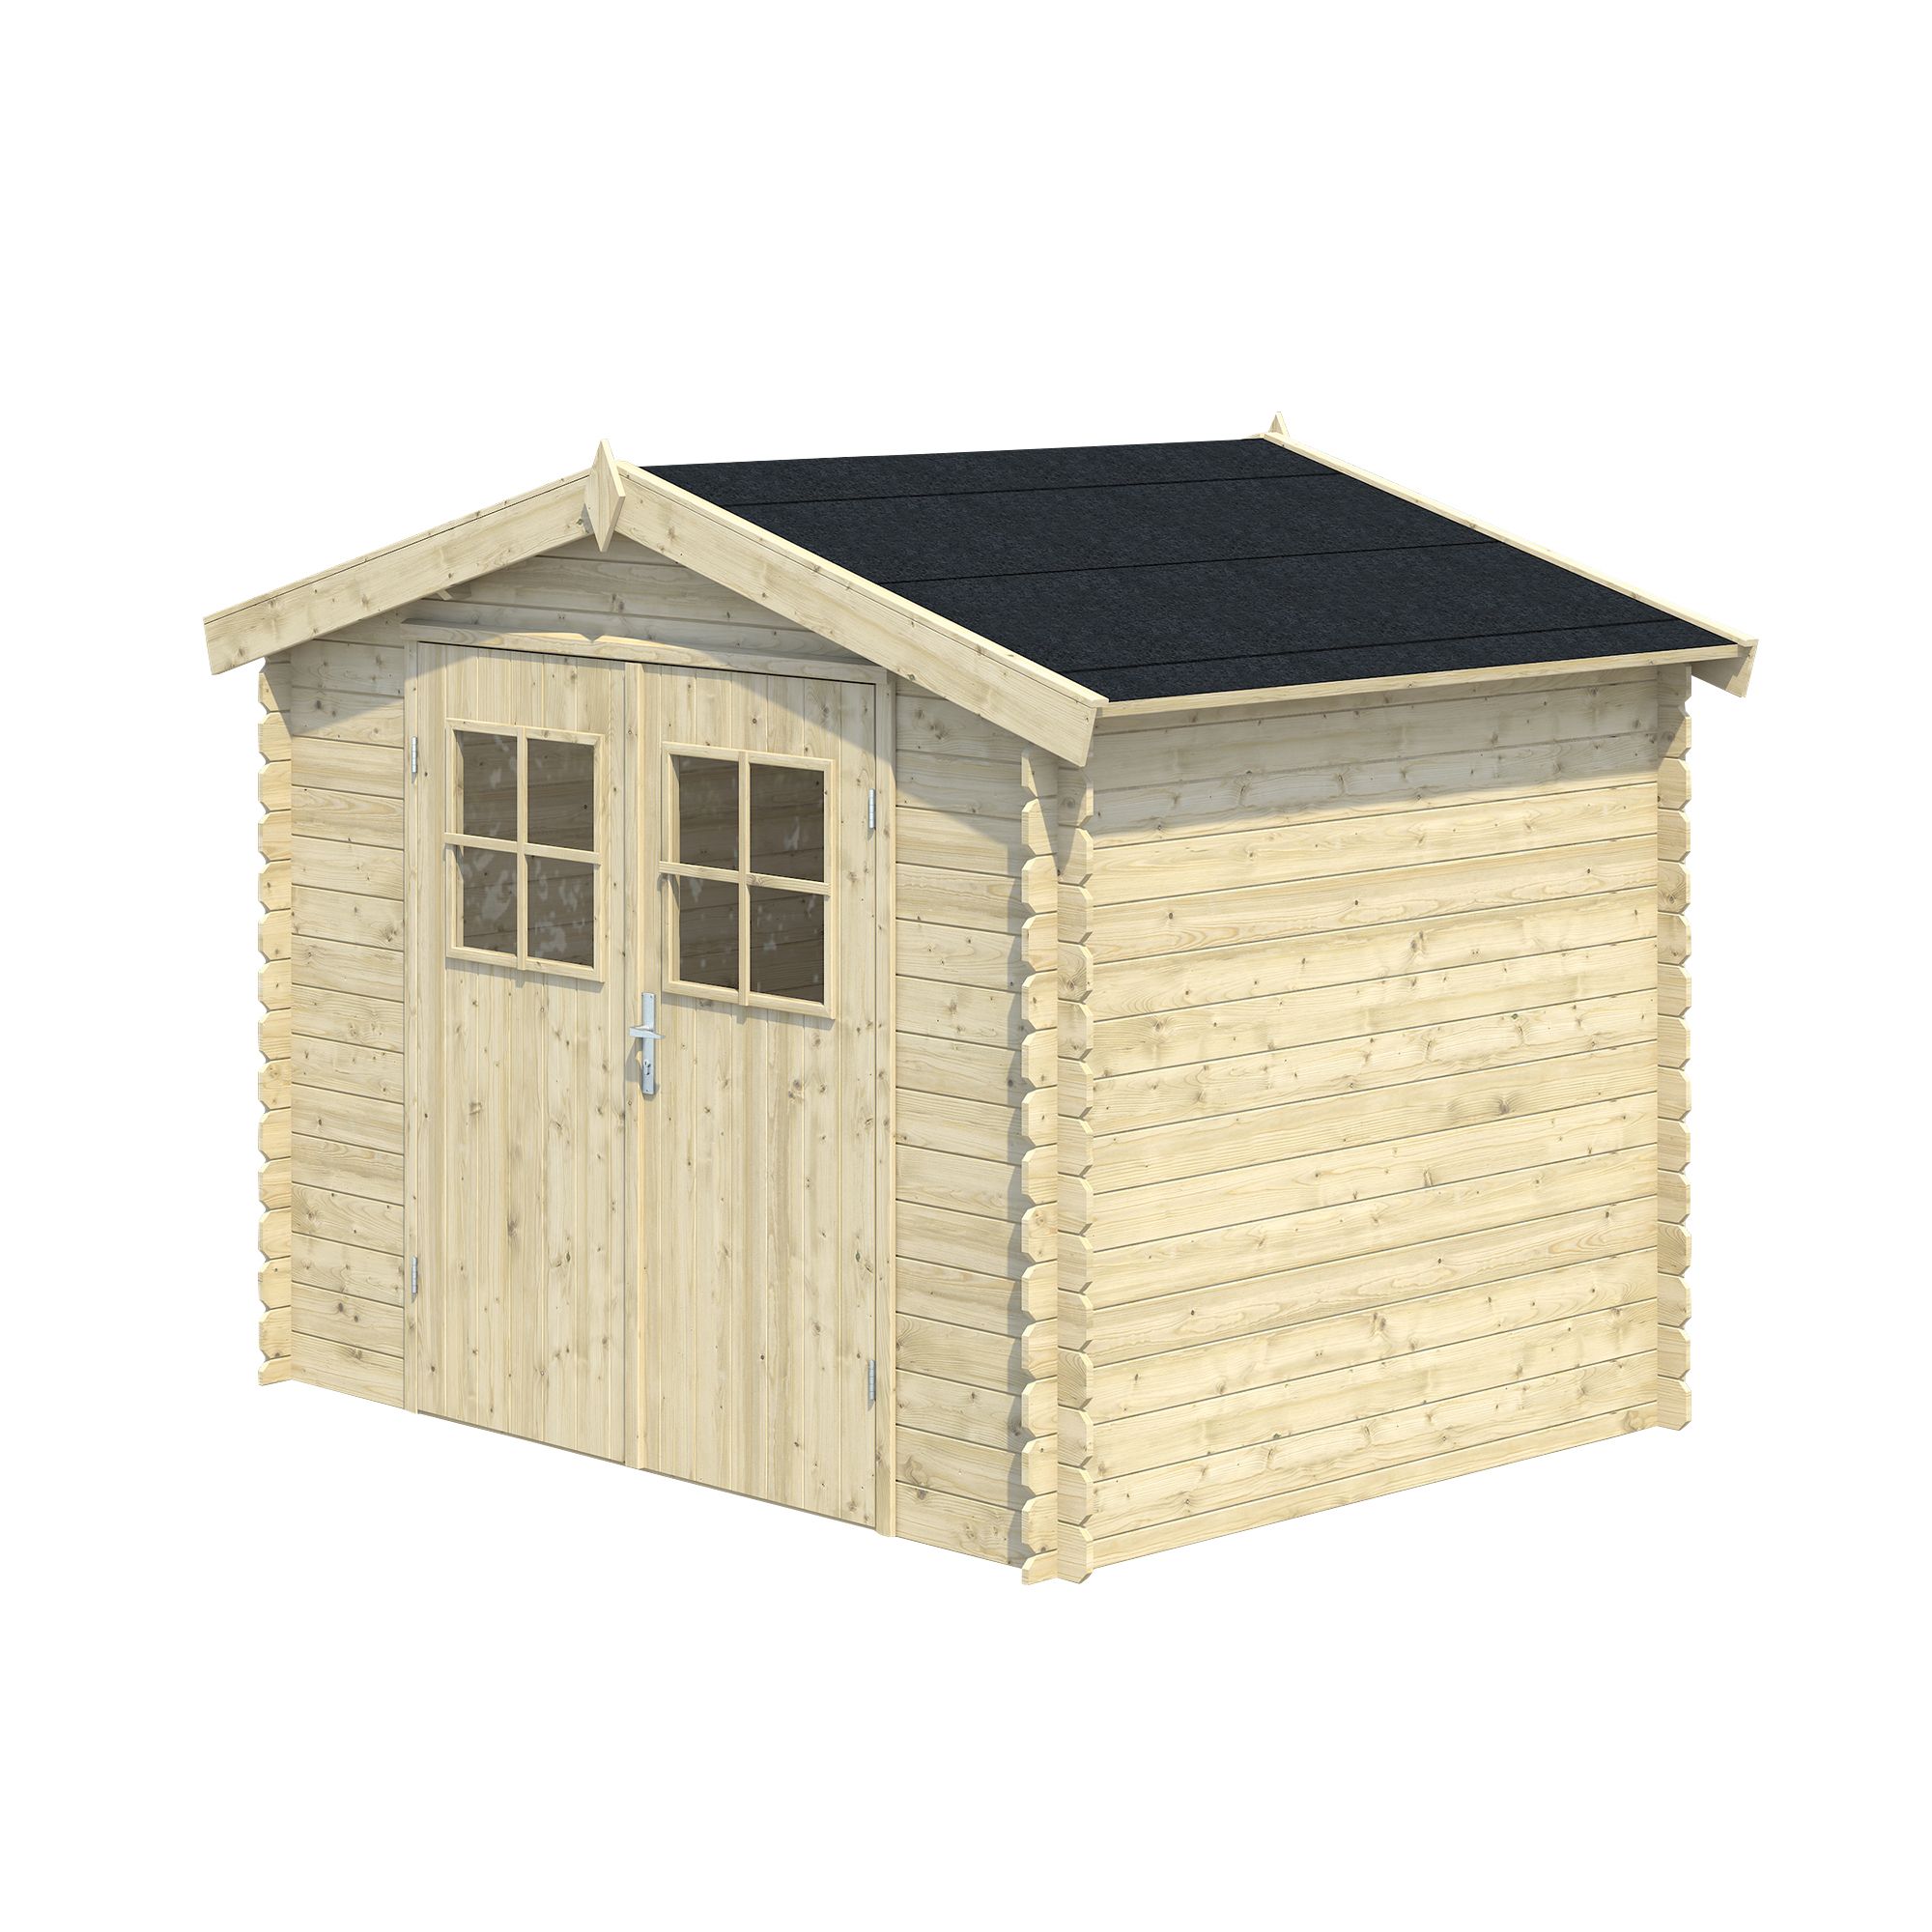 Blooma Mokau 8x6 Apex Tongue & groove Wooden Shed